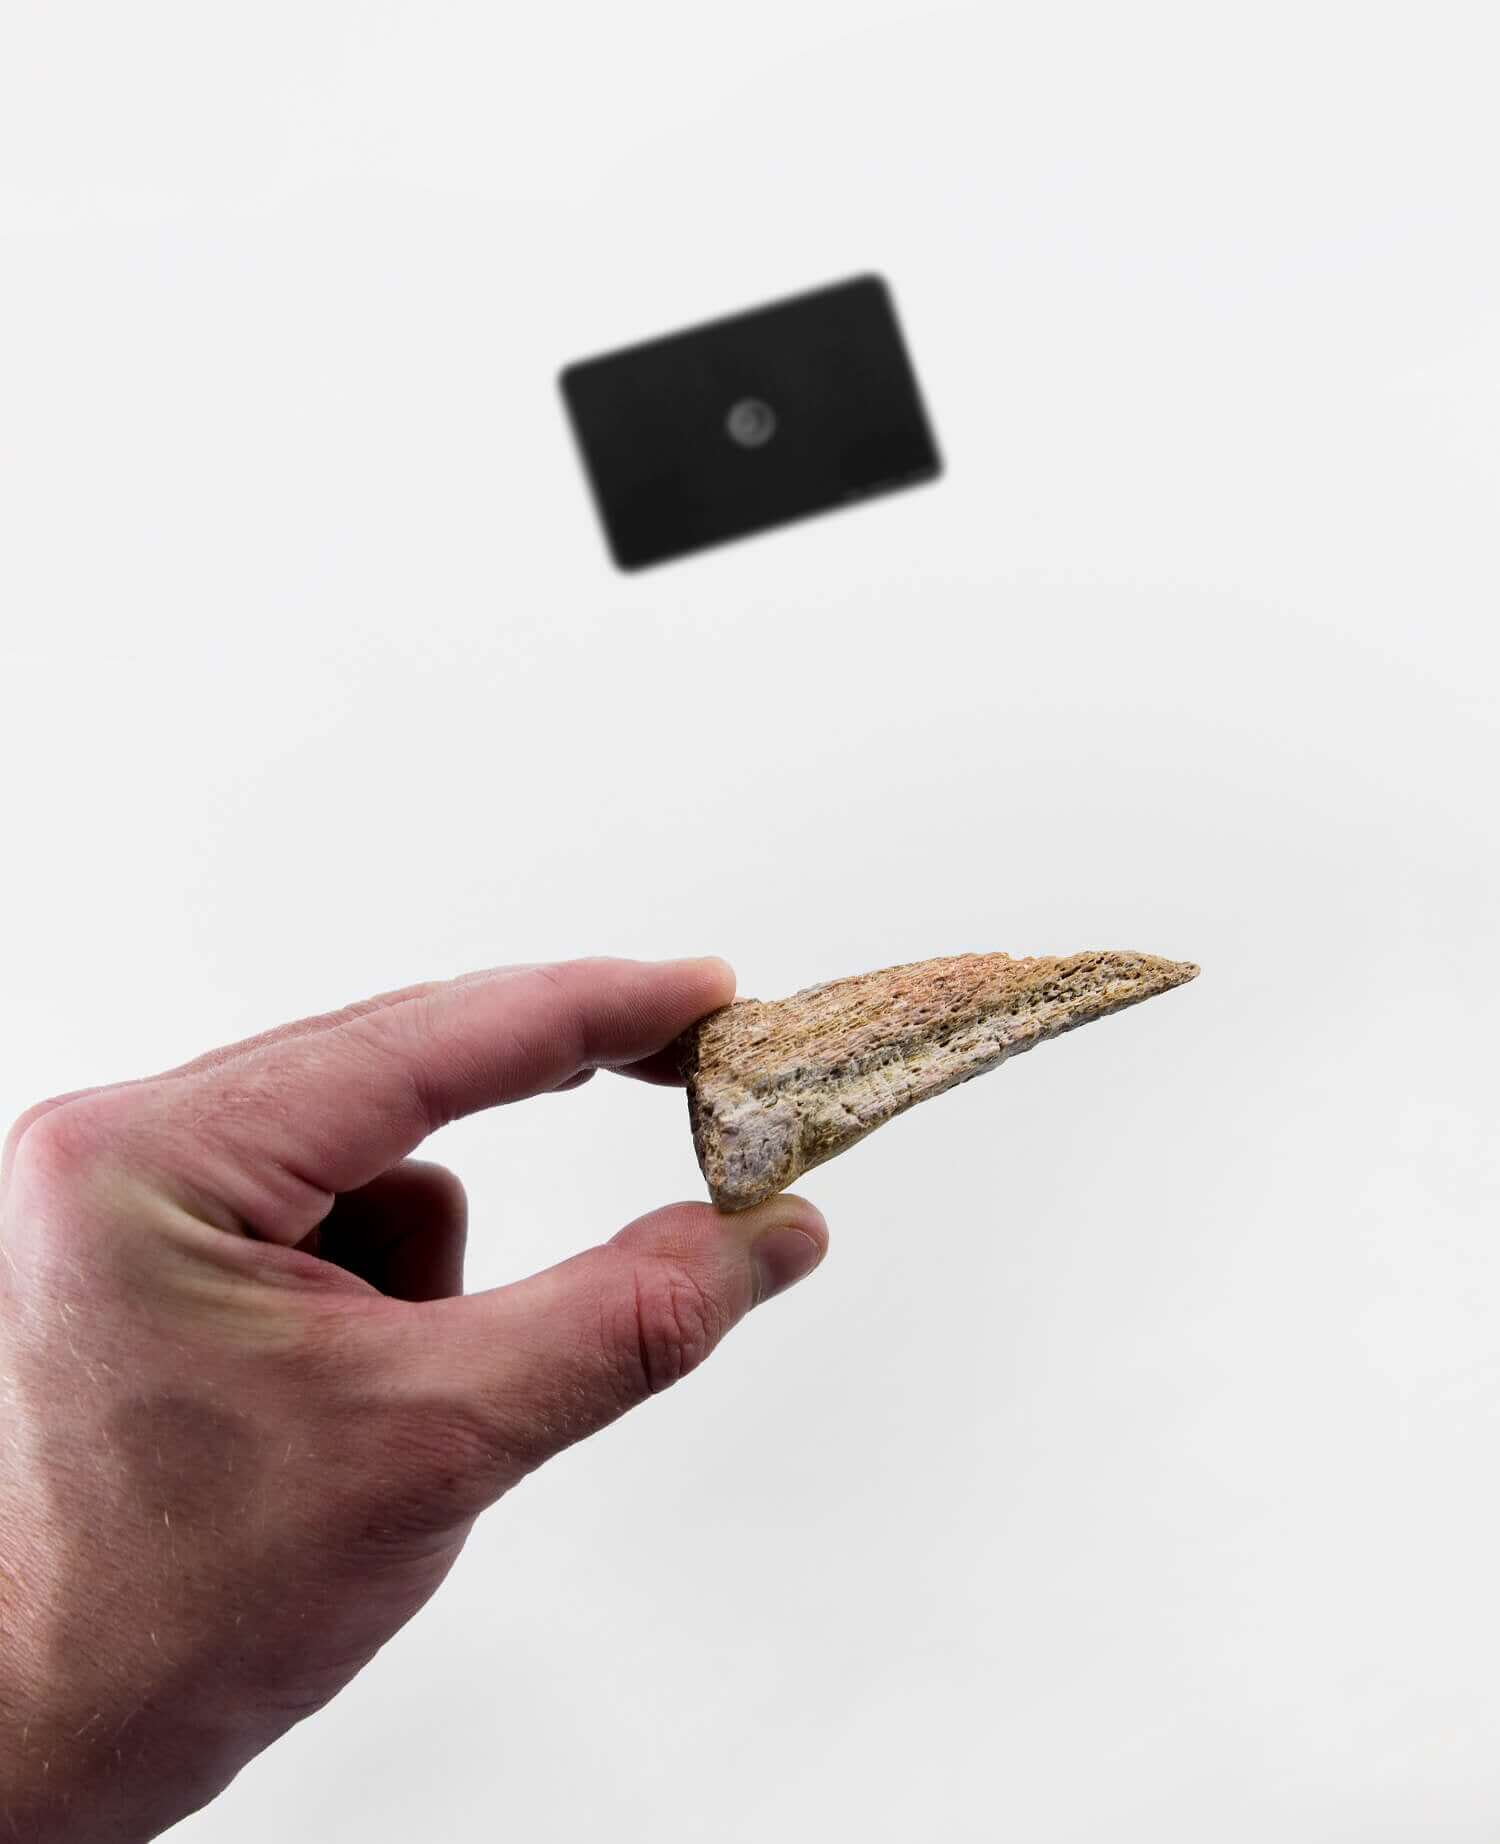 Museum-standard Spinosaurus aegyptiacus dinosaur fossil claw for sale measuring 78mm available at THE FOSSIL STORE